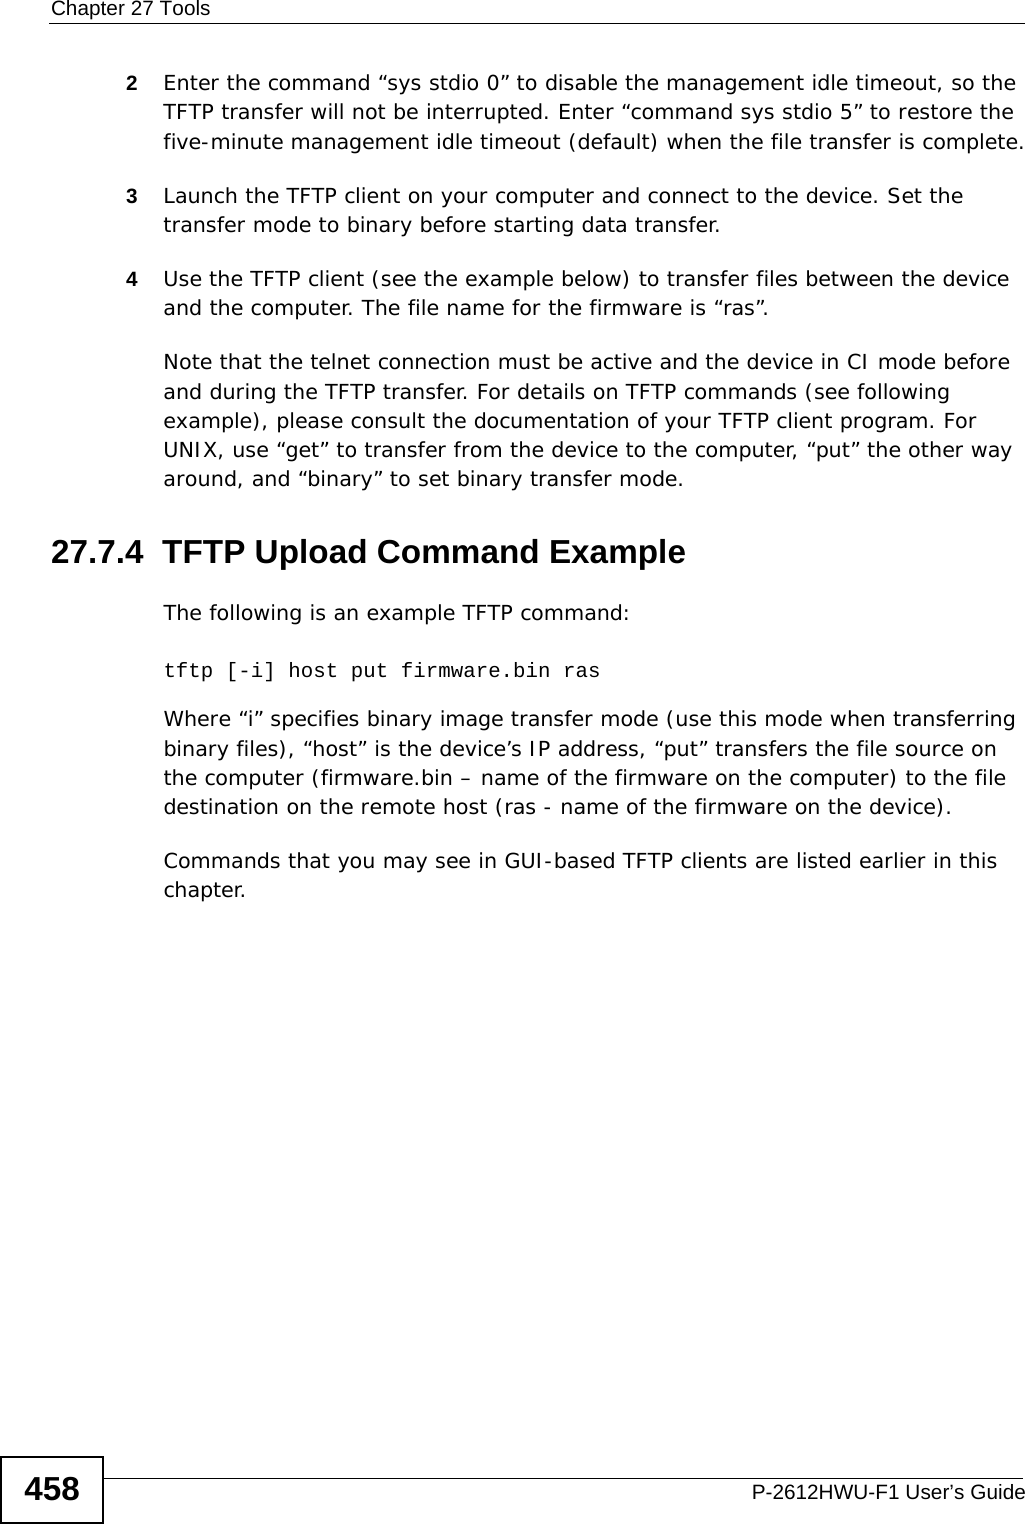 Chapter 27 ToolsP-2612HWU-F1 User’s Guide4582Enter the command “sys stdio 0” to disable the management idle timeout, so the TFTP transfer will not be interrupted. Enter “command sys stdio 5” to restore the five-minute management idle timeout (default) when the file transfer is complete.3Launch the TFTP client on your computer and connect to the device. Set the transfer mode to binary before starting data transfer.4Use the TFTP client (see the example below) to transfer files between the device and the computer. The file name for the firmware is “ras”.Note that the telnet connection must be active and the device in CI mode before and during the TFTP transfer. For details on TFTP commands (see following example), please consult the documentation of your TFTP client program. For UNIX, use “get” to transfer from the device to the computer, “put” the other way around, and “binary” to set binary transfer mode.27.7.4  TFTP Upload Command ExampleThe following is an example TFTP command:tftp [-i] host put firmware.bin rasWhere “i” specifies binary image transfer mode (use this mode when transferring binary files), “host” is the device’s IP address, “put” transfers the file source on the computer (firmware.bin – name of the firmware on the computer) to the file destination on the remote host (ras - name of the firmware on the device).Commands that you may see in GUI-based TFTP clients are listed earlier in this chapter.